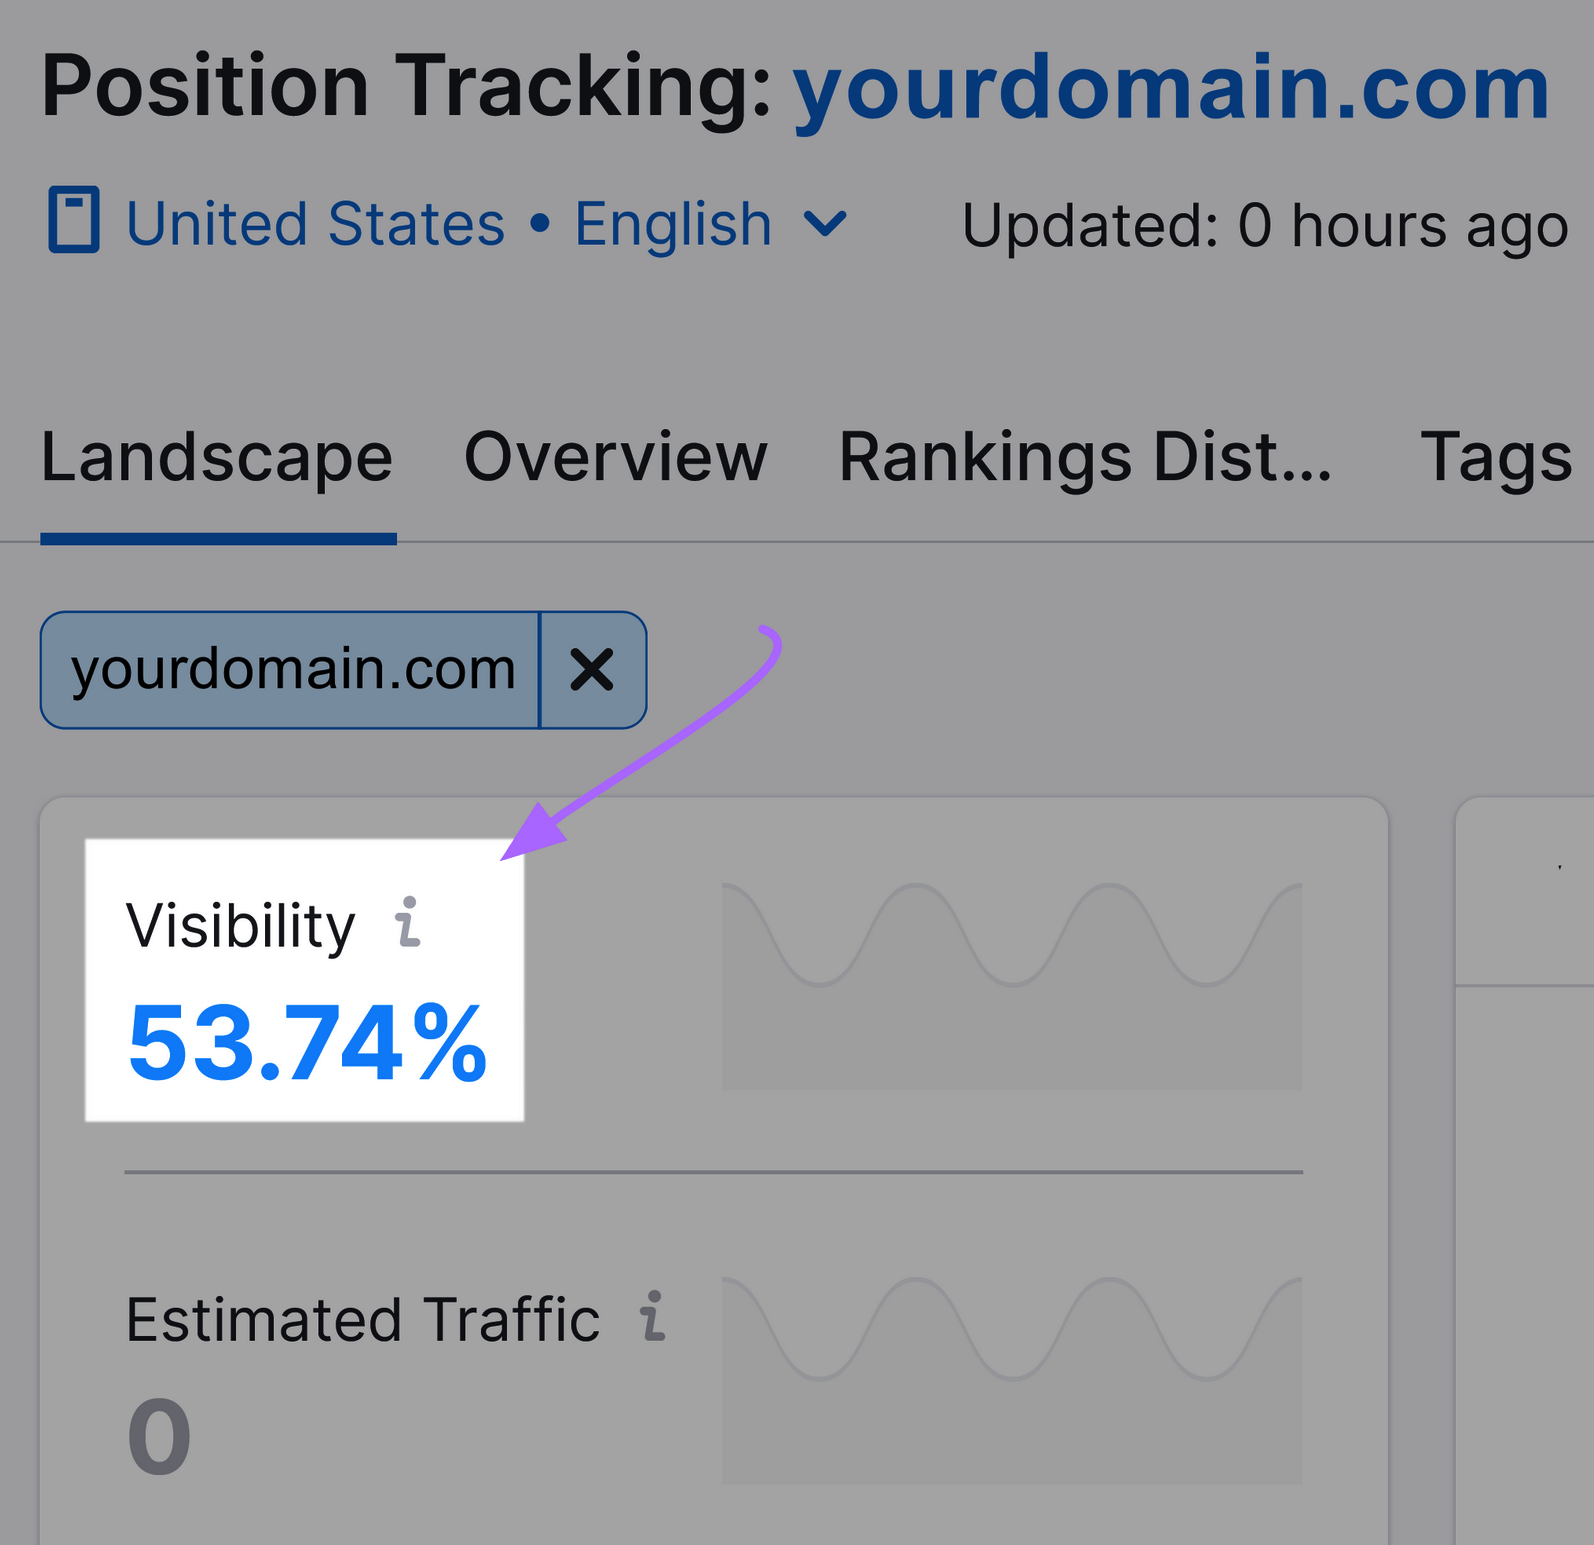 "Visibility" widget showing "53.74%" successful  Position Tracking scenery  report